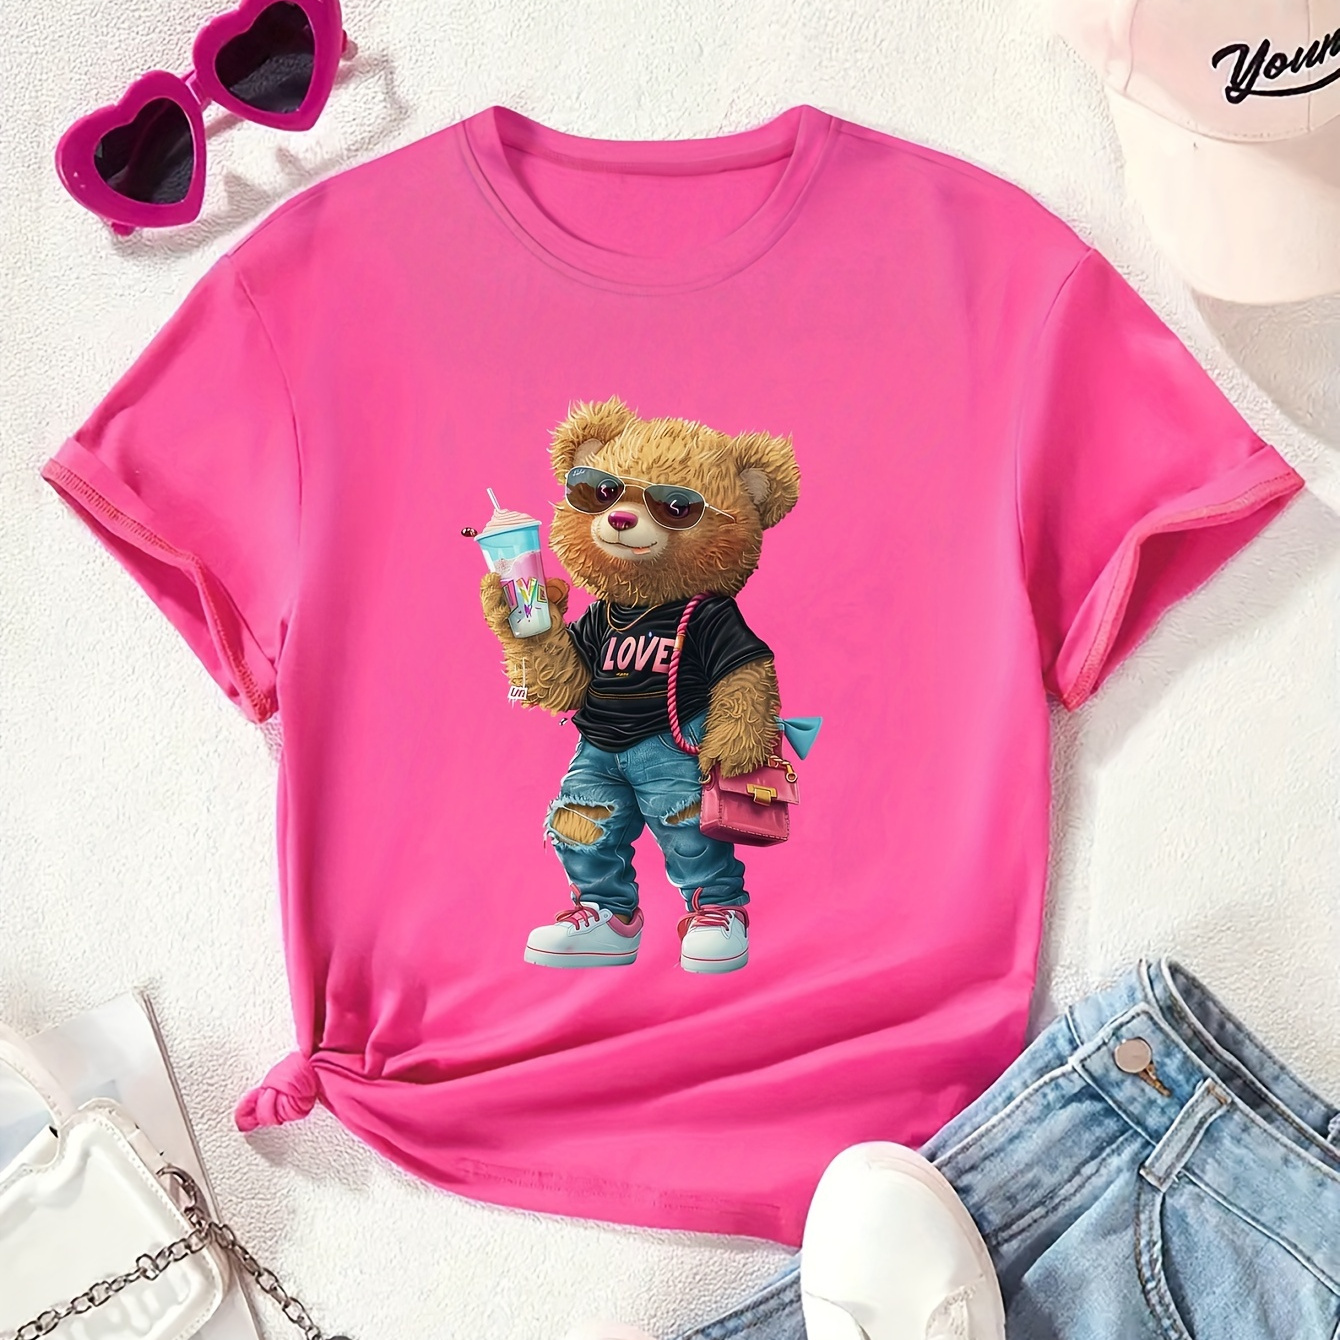 

Cartoon Bear Doll With Drink And Bag Graphic Print, Tween Girls' Casual & Comfy Crew Neck Short Sleeve Tee For Spring & Summer, Tween Girls' Clothes For Outdoor Activities